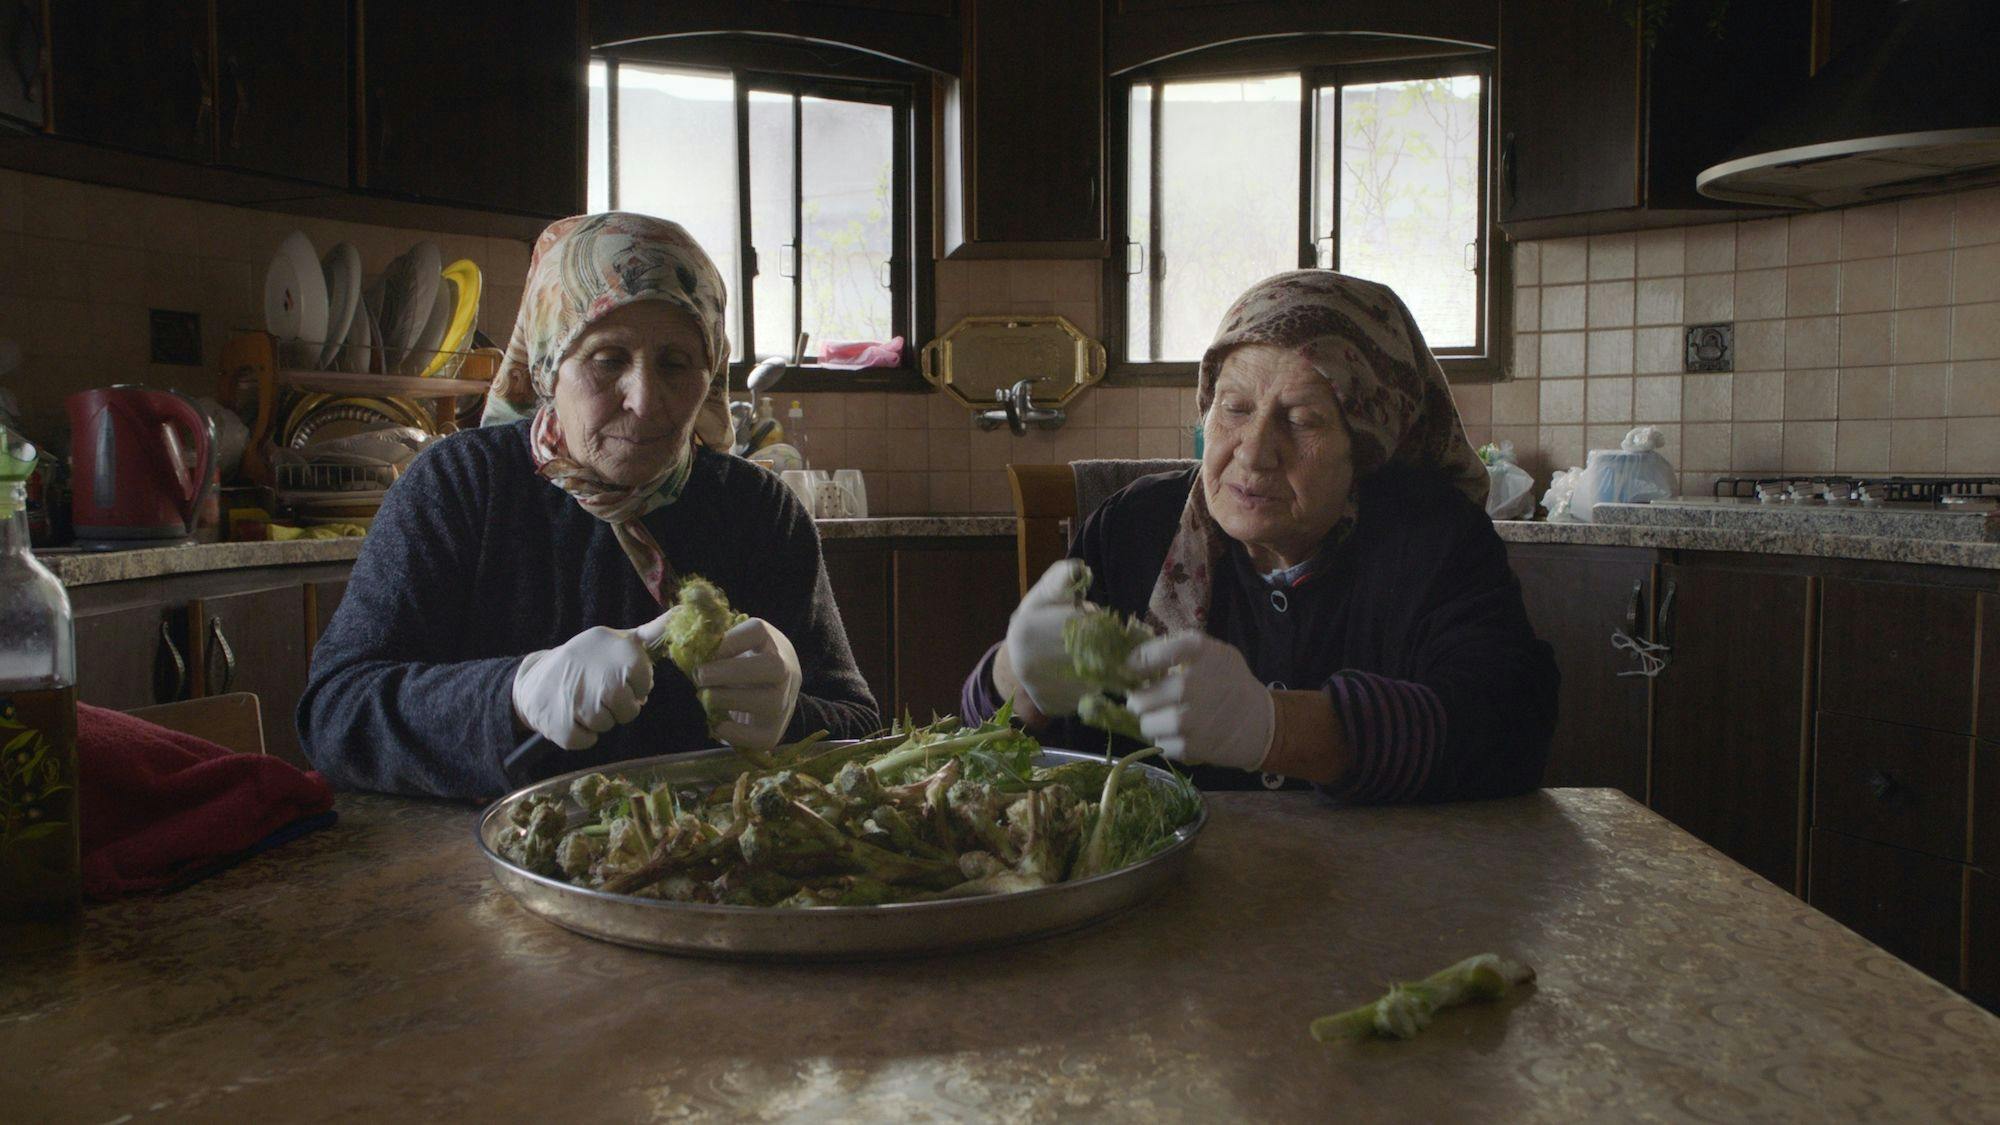 Two women sitting at a table in a kitchen preparing food.